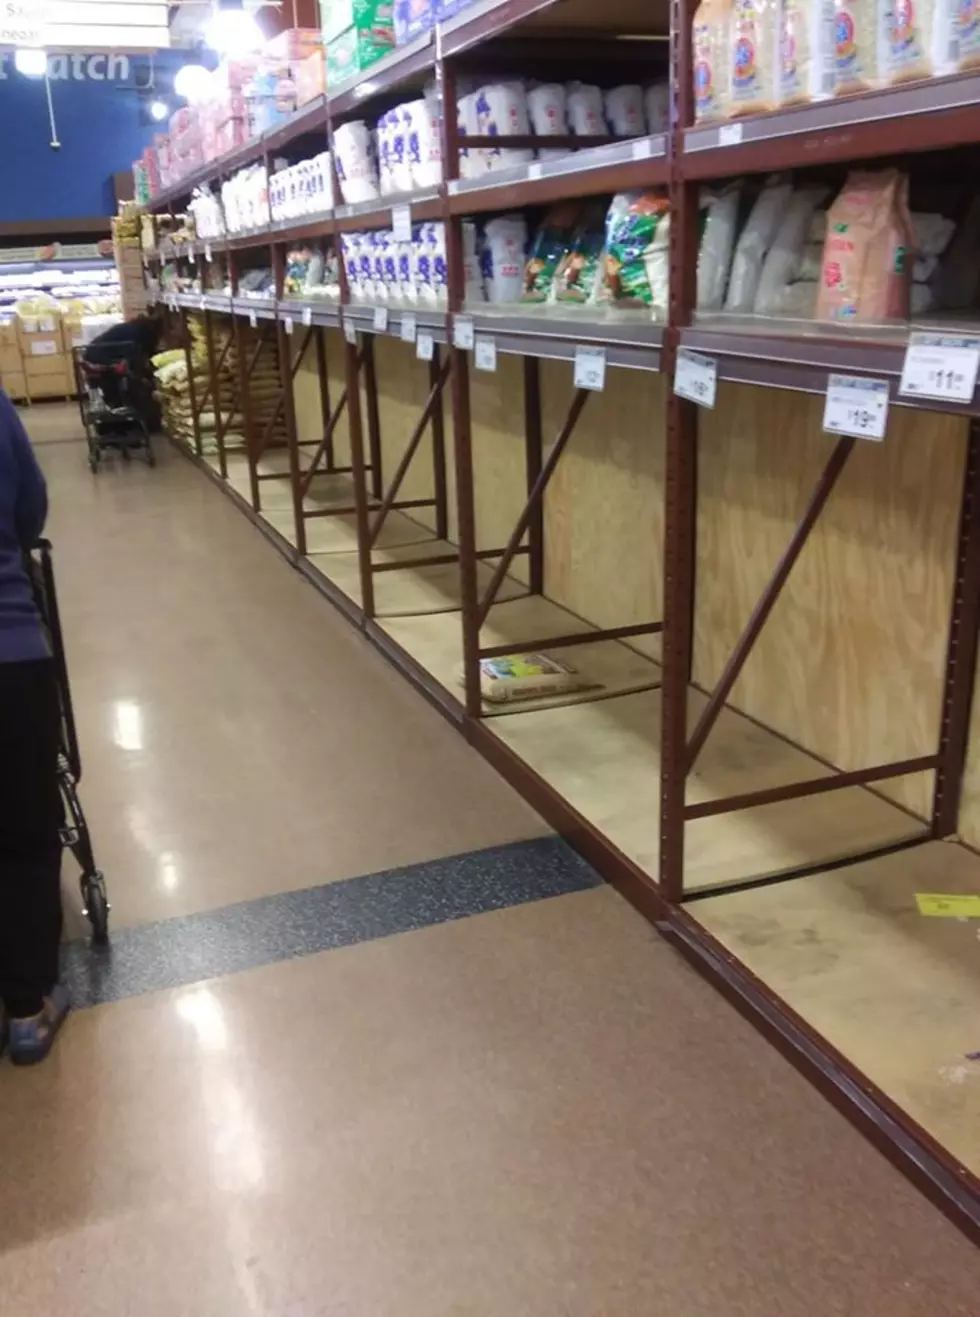 Coronavirus Causing Stores To Run Out Of Food And Supplies